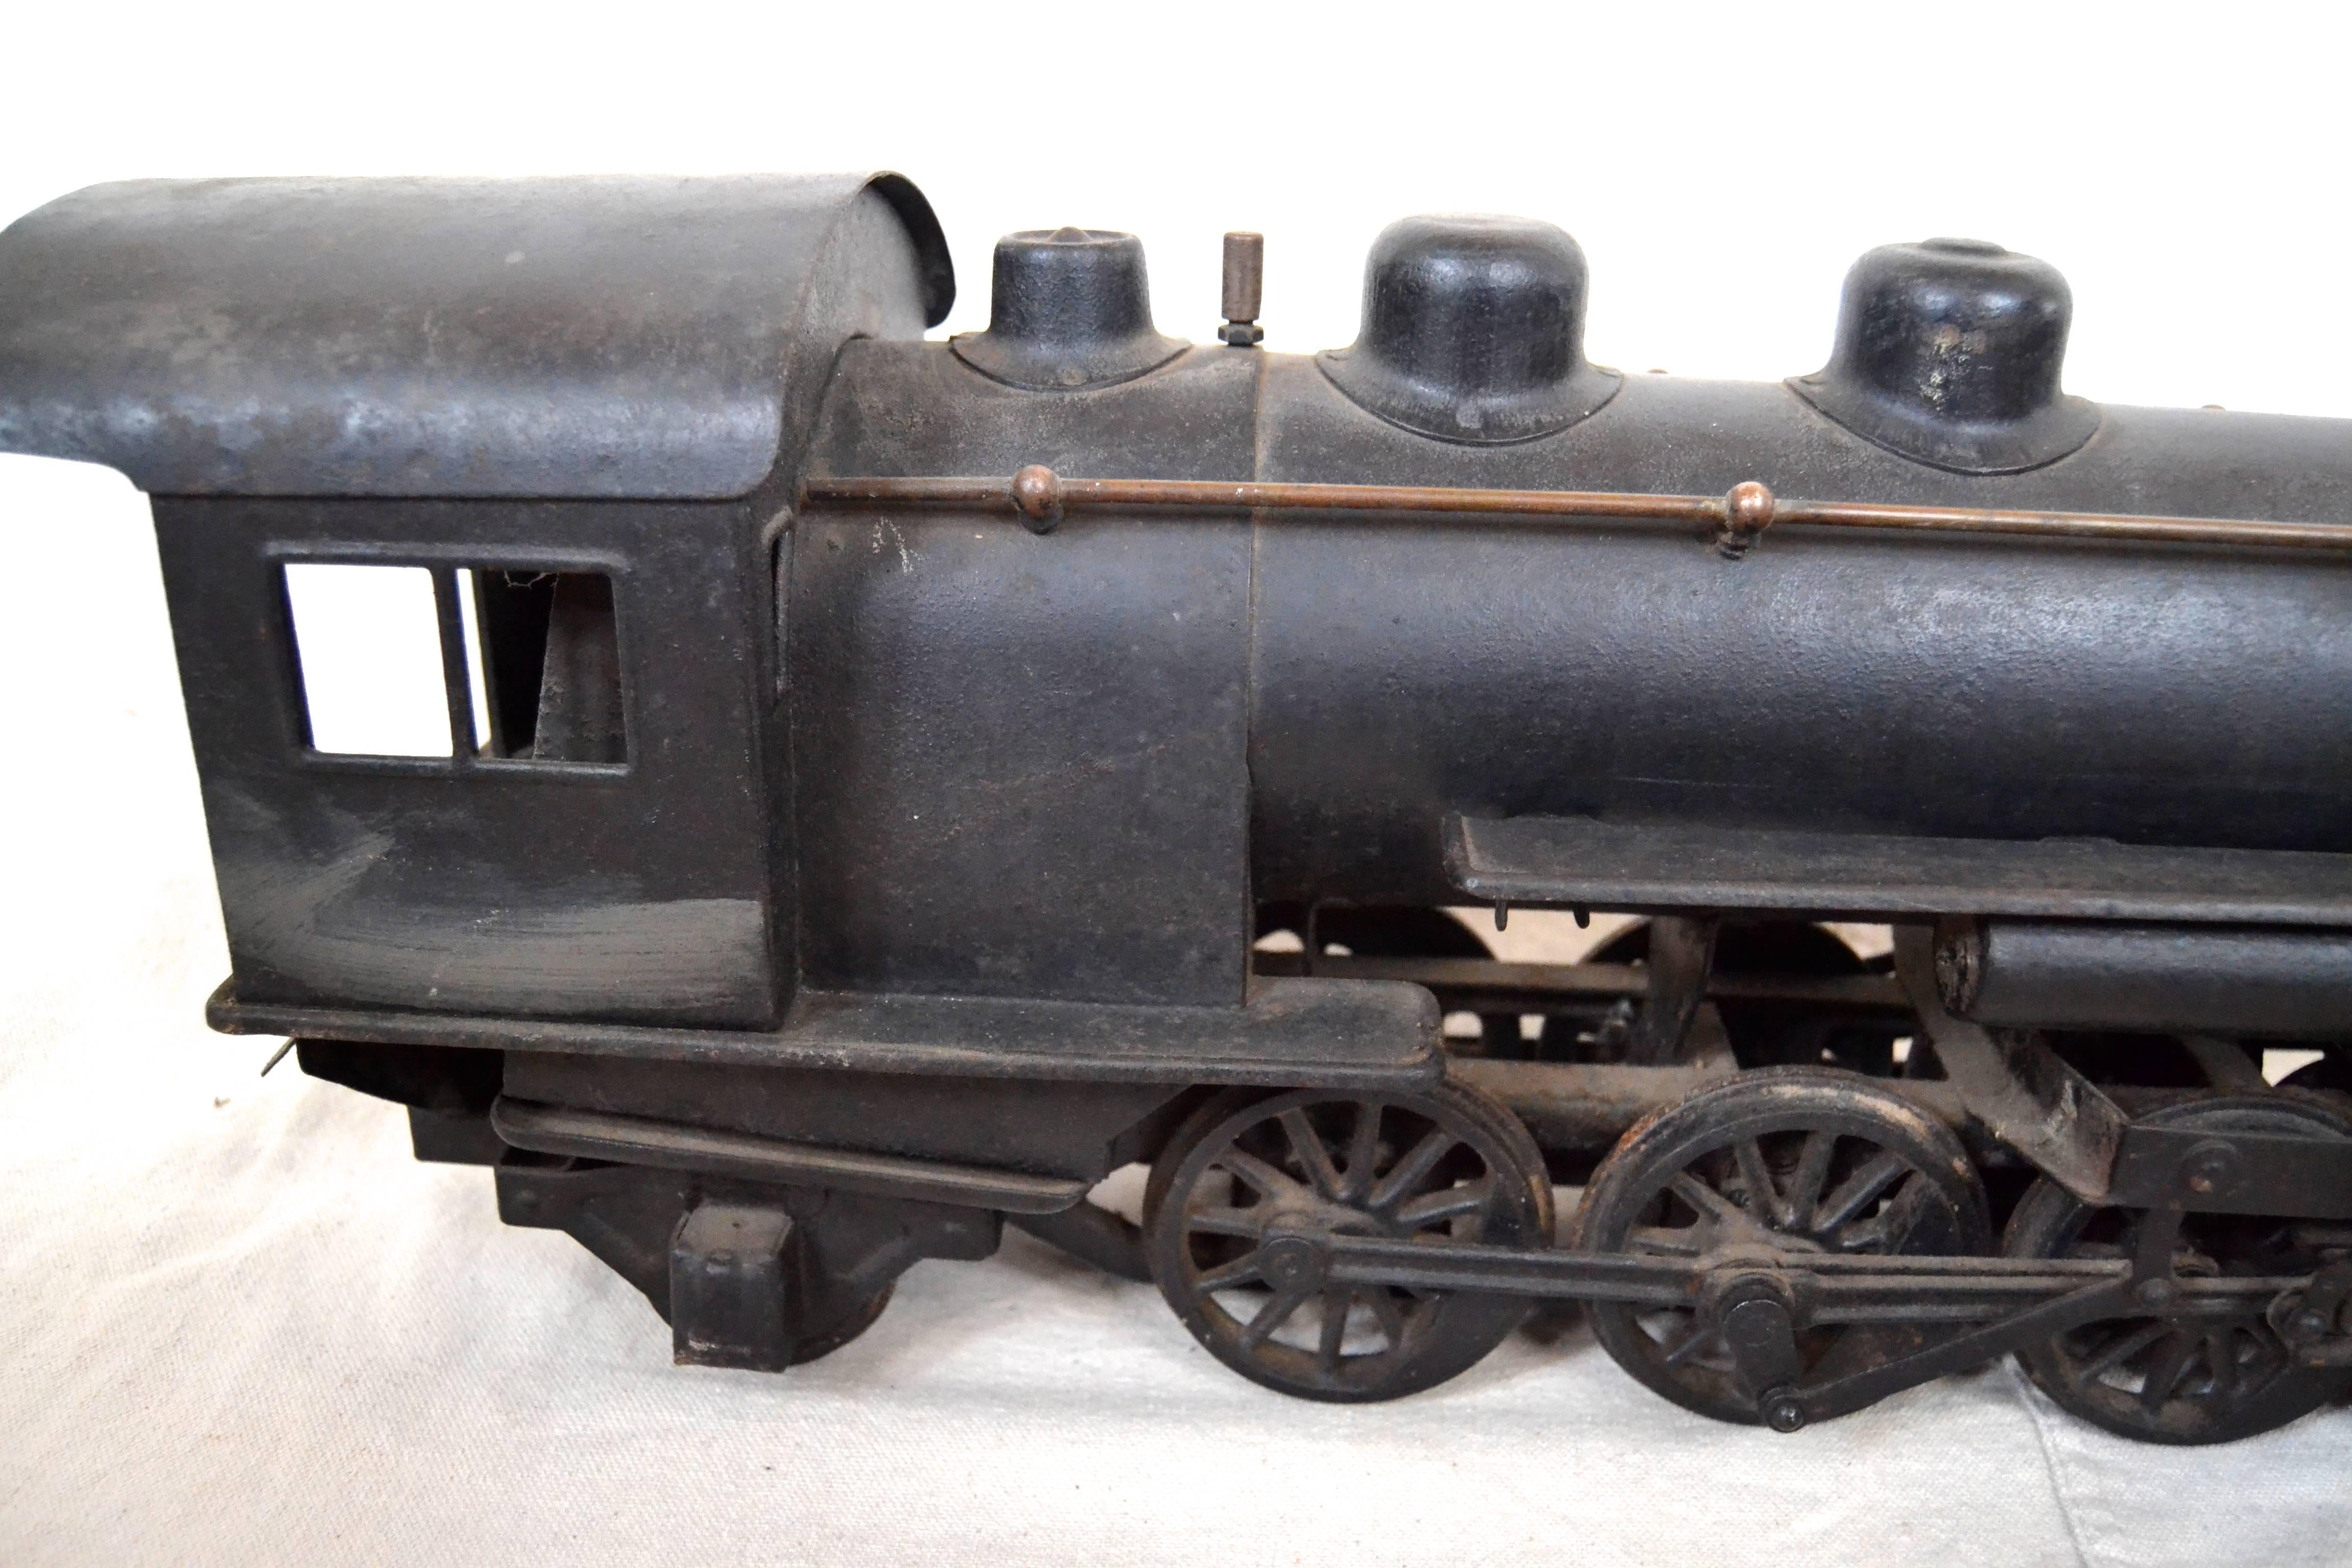 Large iron model of a Victorian Locomotive crafted of sheet iron with cast iron details such as the working wheels. Sculptural model made with an impressive restraint of detail resulting in a strong Folk Art statement. Great old black painted